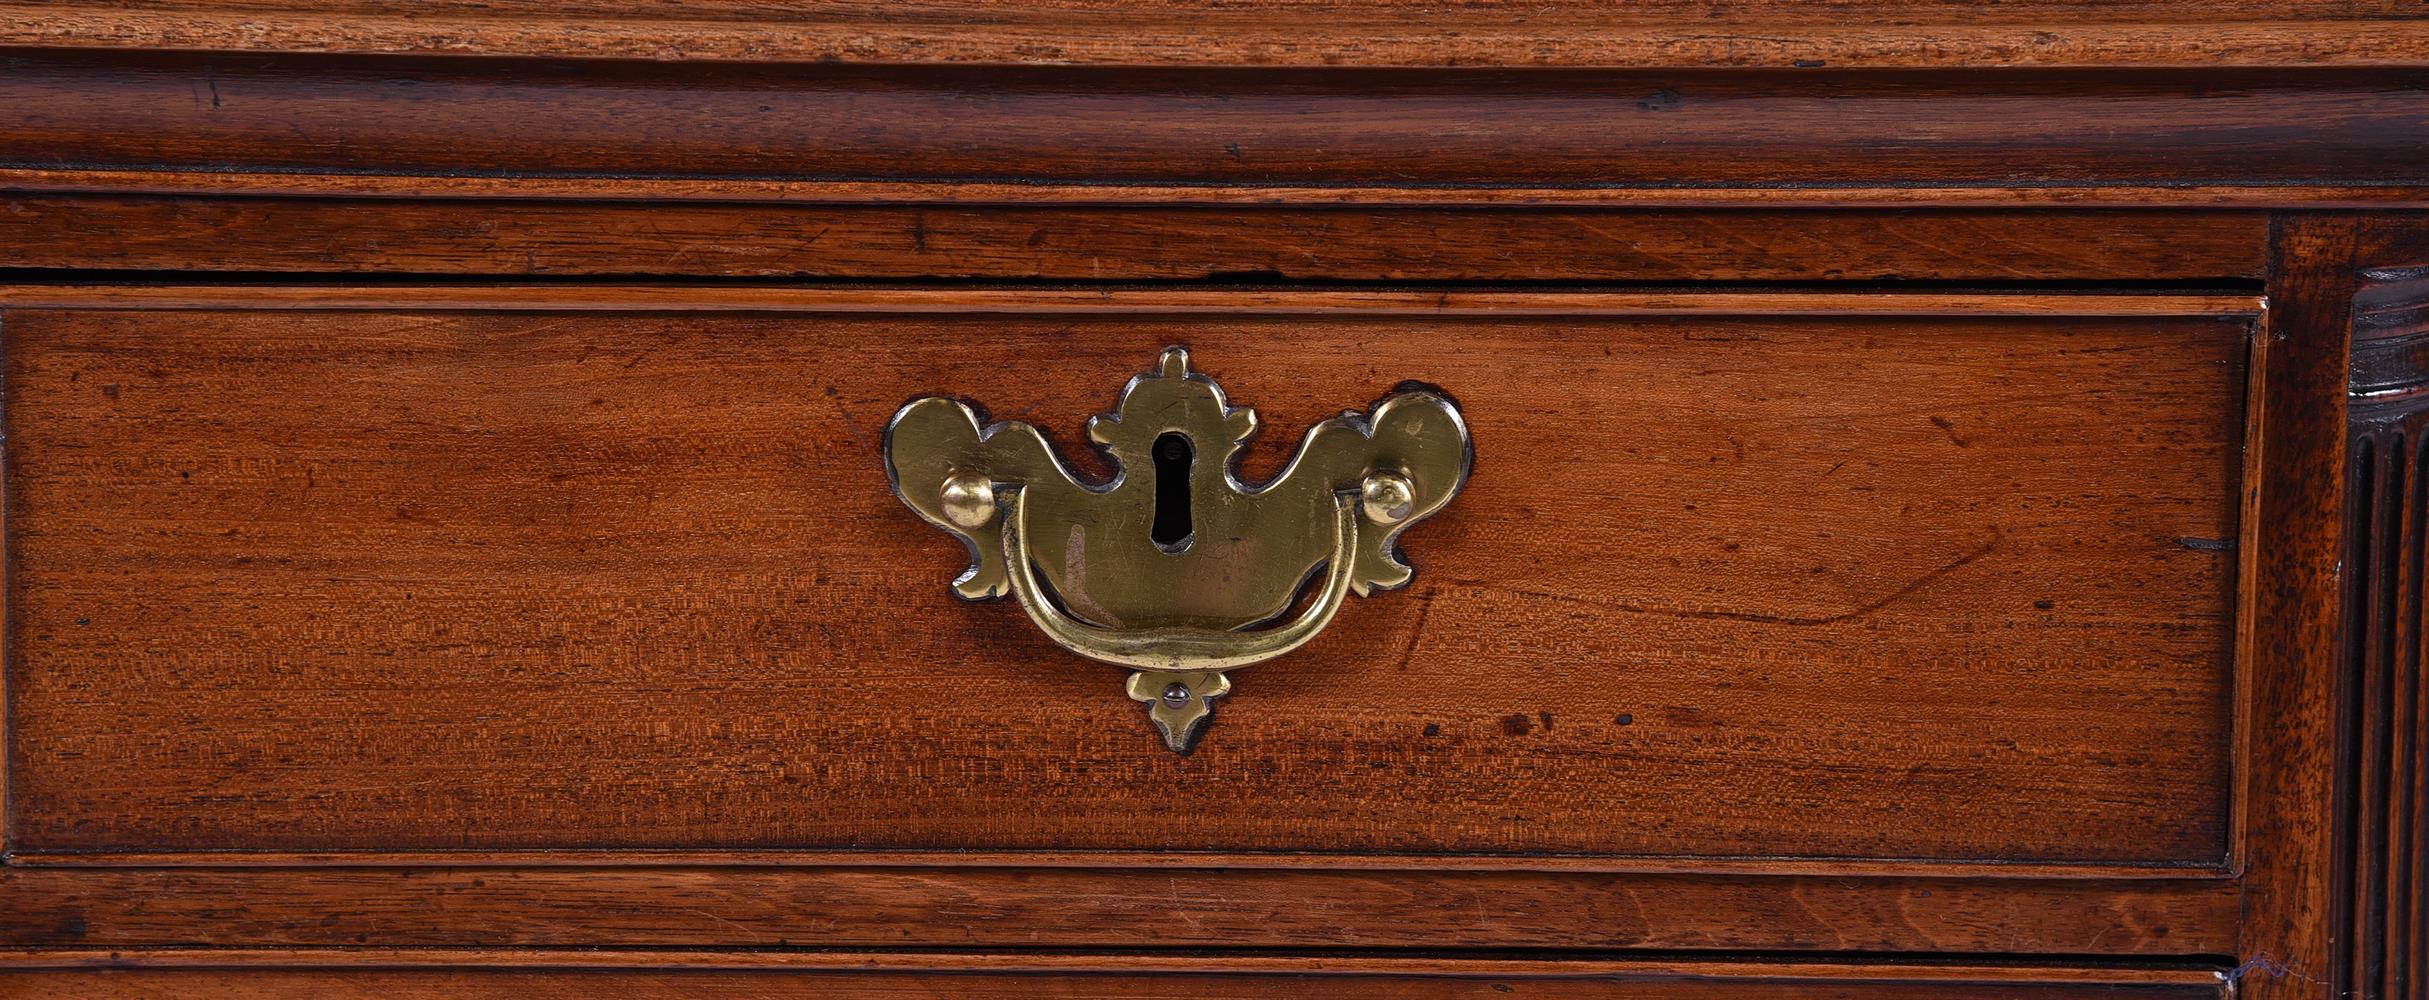 A GEORGE III MAHOGANY CHEST OF DRAWERS, CIRCA 1770 - Image 3 of 7